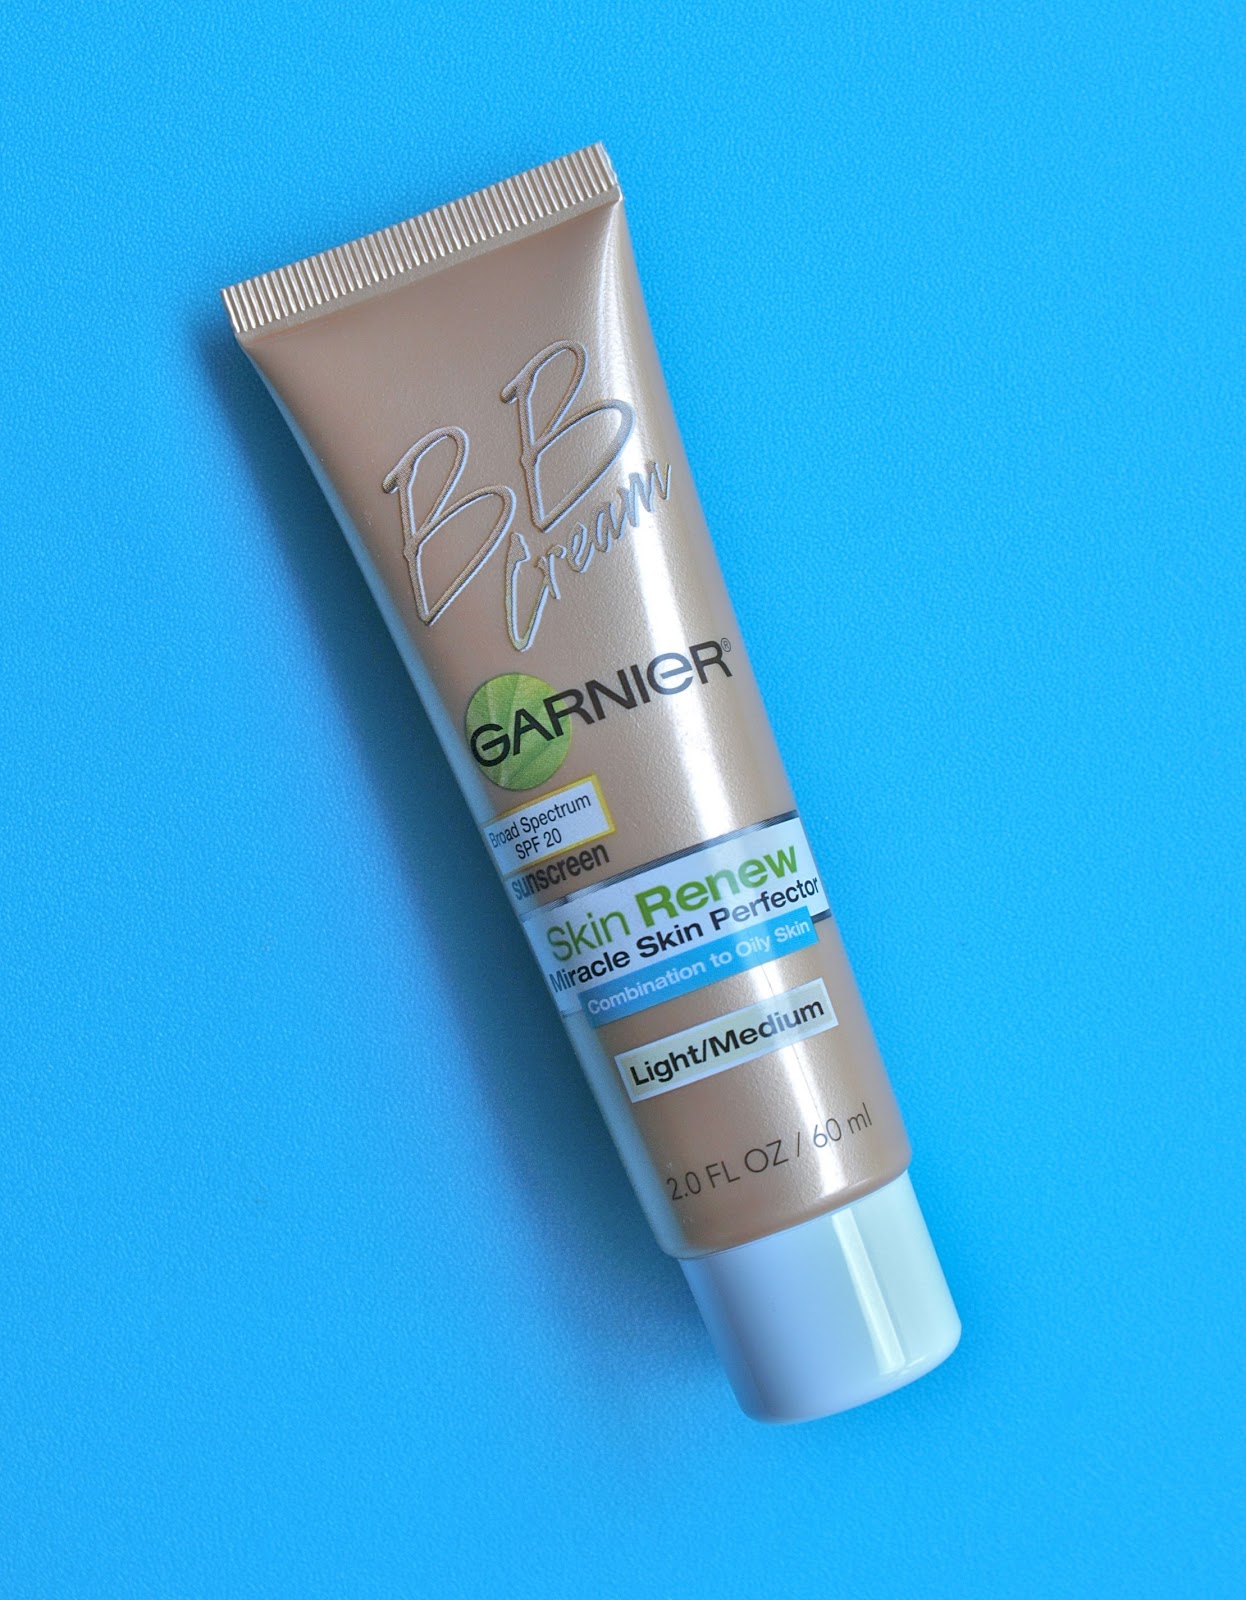 Sømil partiskhed mulighed Garnier Skin Renew Miracle Skin Perfecter BB Cream: Review and Swatches |  The Happy Sloths: Beauty, Makeup, and Skincare Blog with Reviews and  Swatches